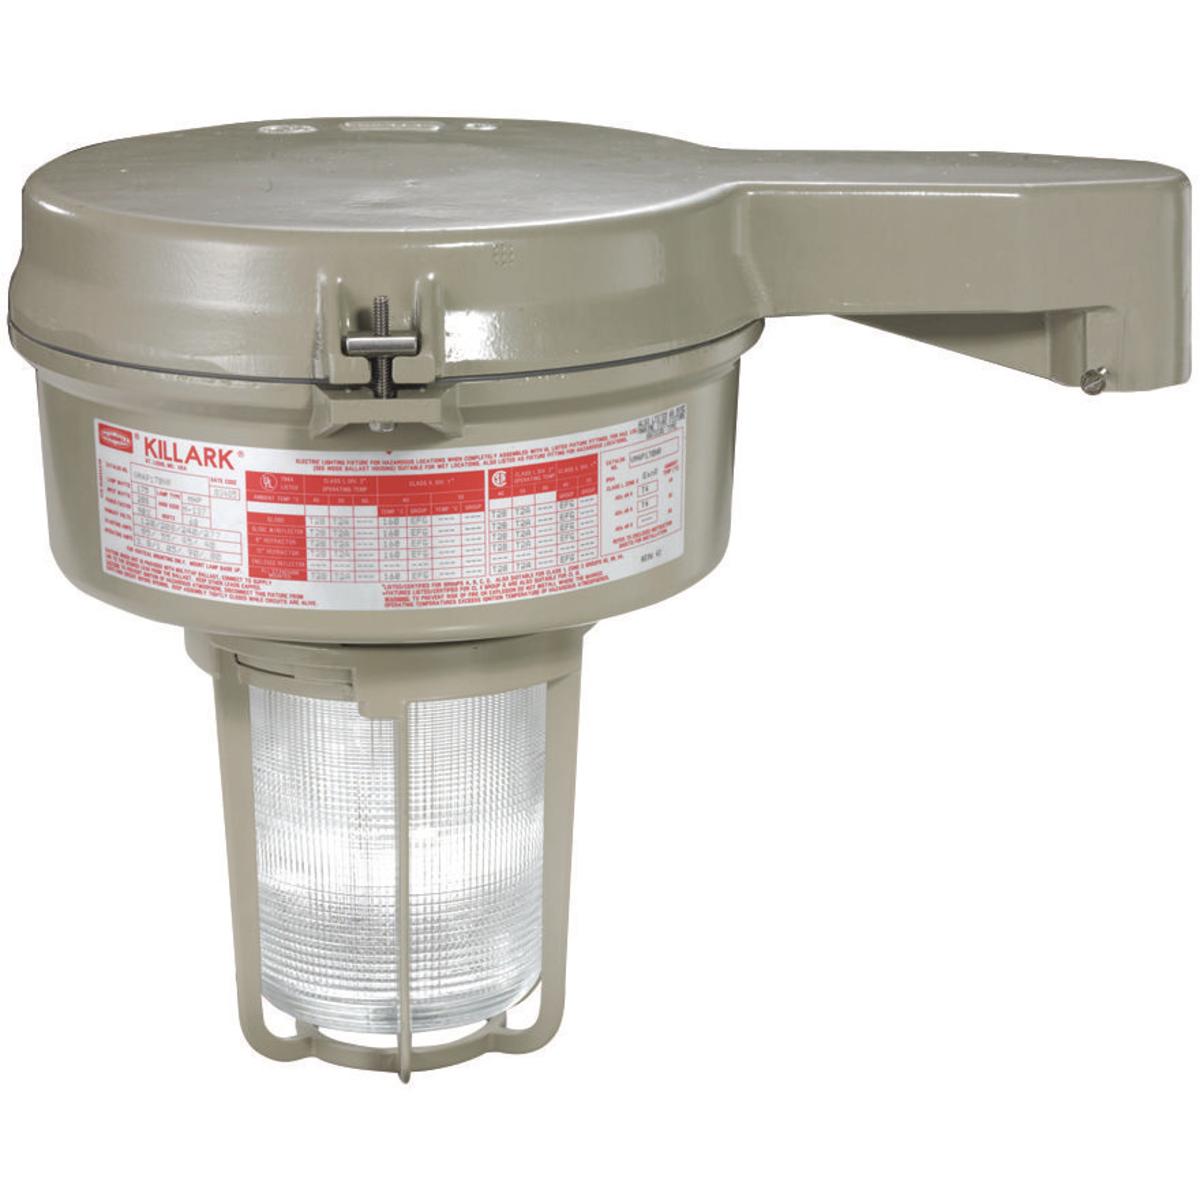 Hubbell VM3H100S5R5G VM3 Series - 100W Metal Halide Quadri-Volt - 1/1/2" Stanchion Mount - Type V Glass Refractor and Guard  ; Ballast tank and splice box – corrosion resistant copper-free aluminum alloy with baked powder epoxy/polyester finish, electrostatically applied for 